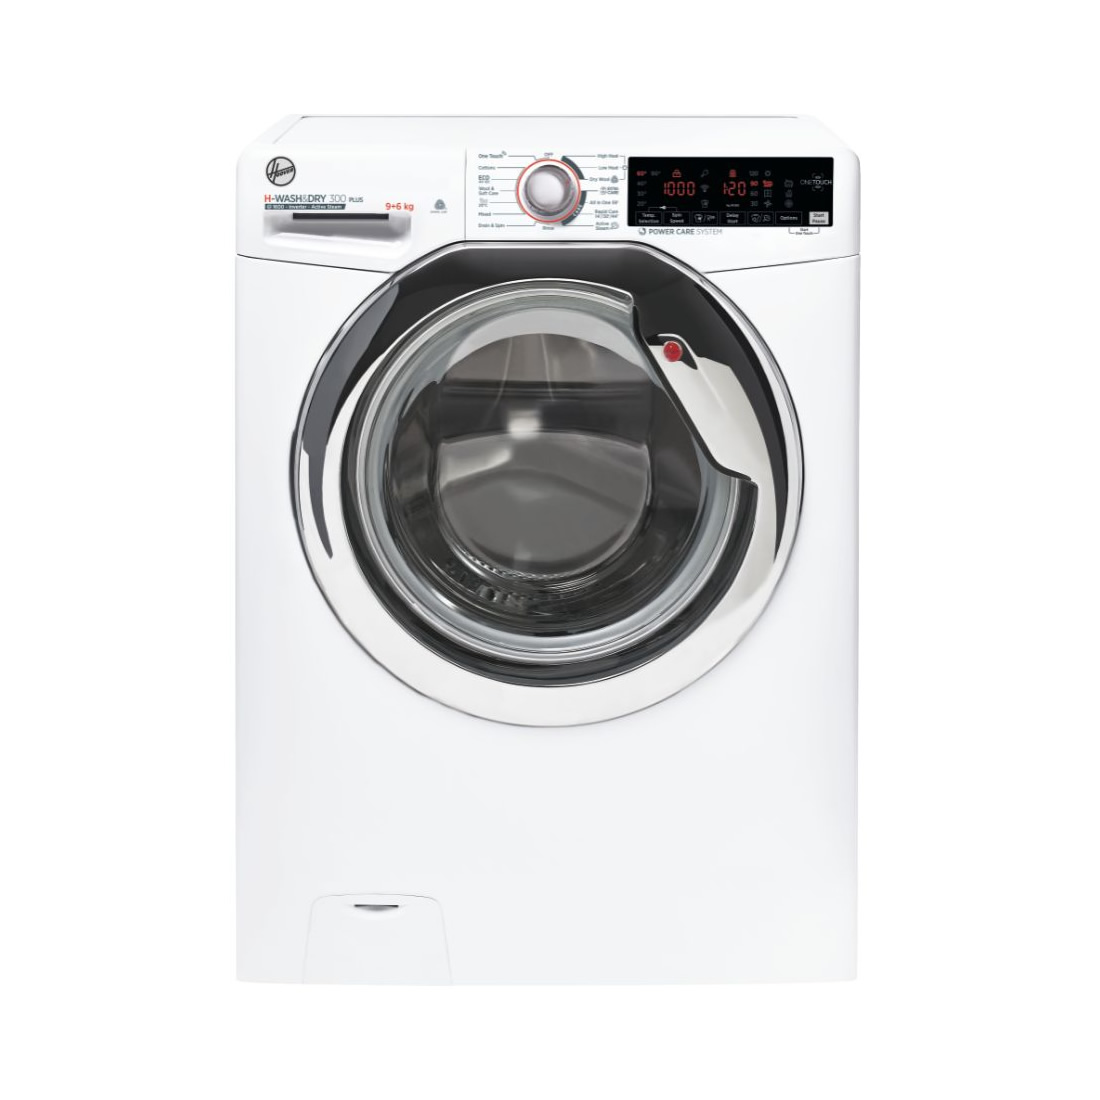 Hoover 1600rpm Washer Dryer 9kg/6kg Load Wi-Fi Class D/A